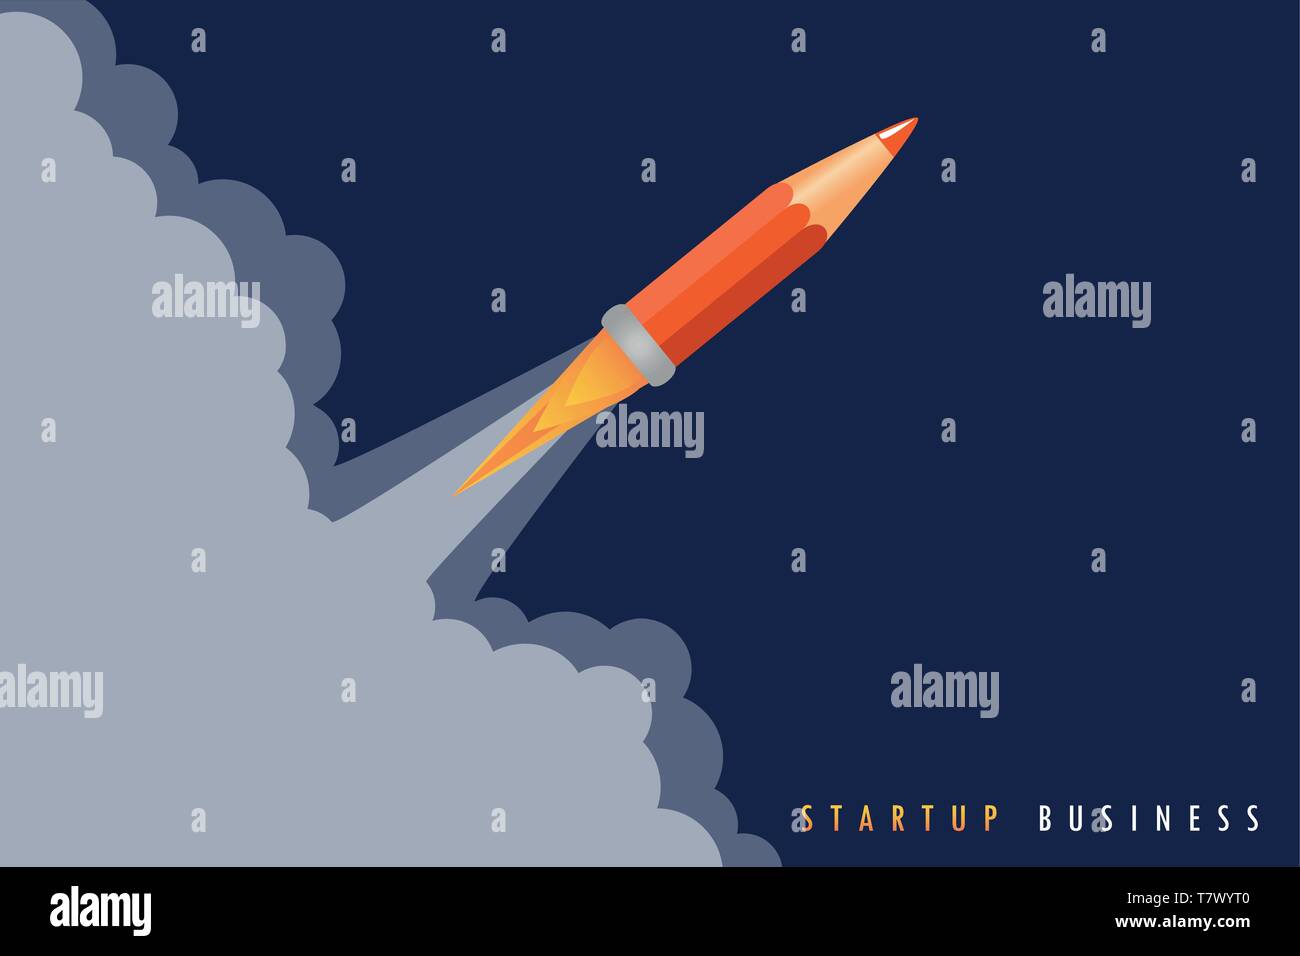 startup business concept with pencil rocket launch vector illustration EPS10 Stock Vector